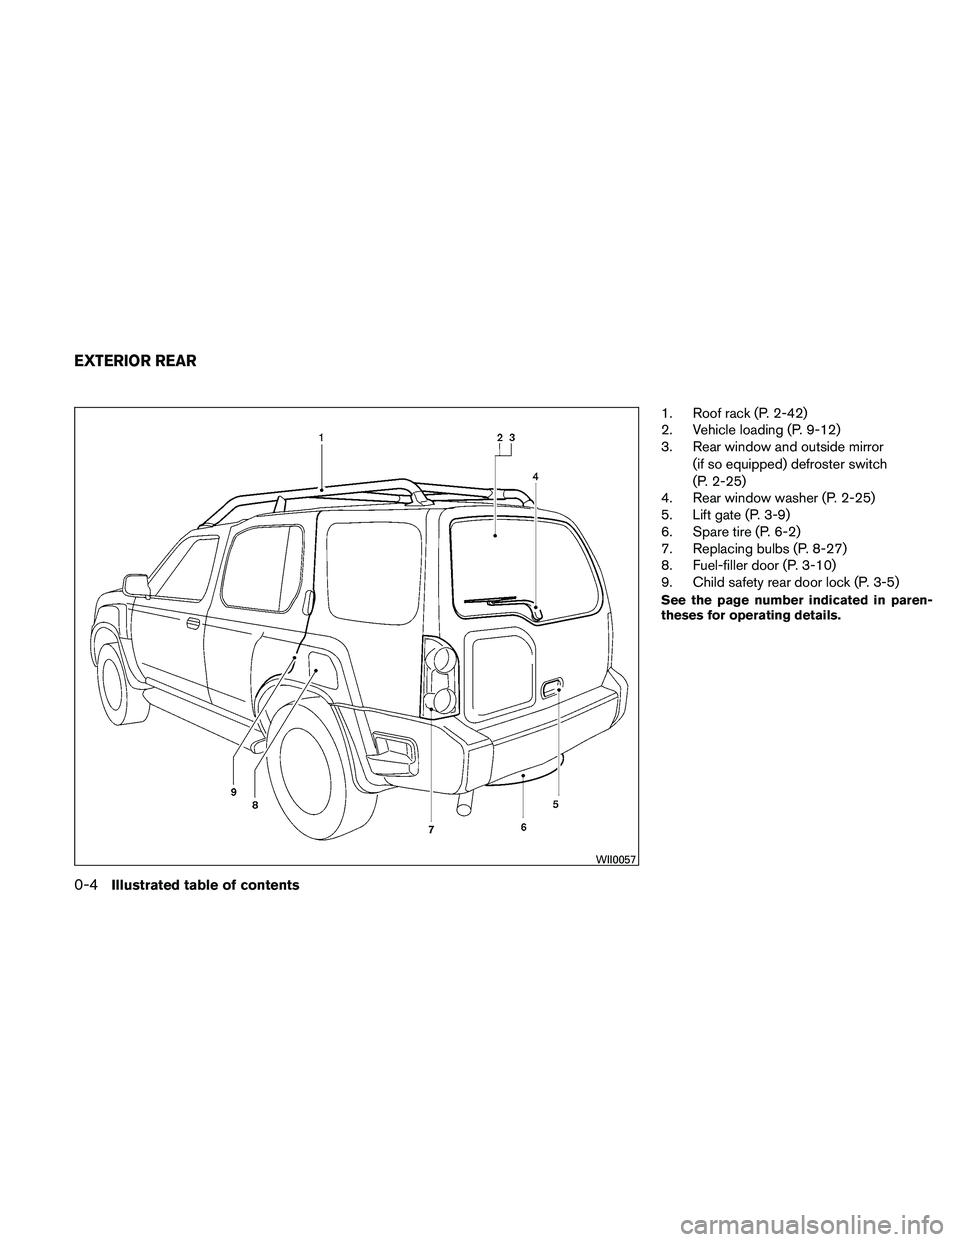 NISSAN XTERRA 2010  Owner´s Manual 1. Roof rack (P. 2-42)
2. Vehicle loading (P. 9-12)
3. Rear window and outside mirror(if so equipped) defroster switch
(P. 2-25)
4. Rear window washer (P. 2-25)
5. Lift gate (P. 3-9)
6. Spare tire (P.